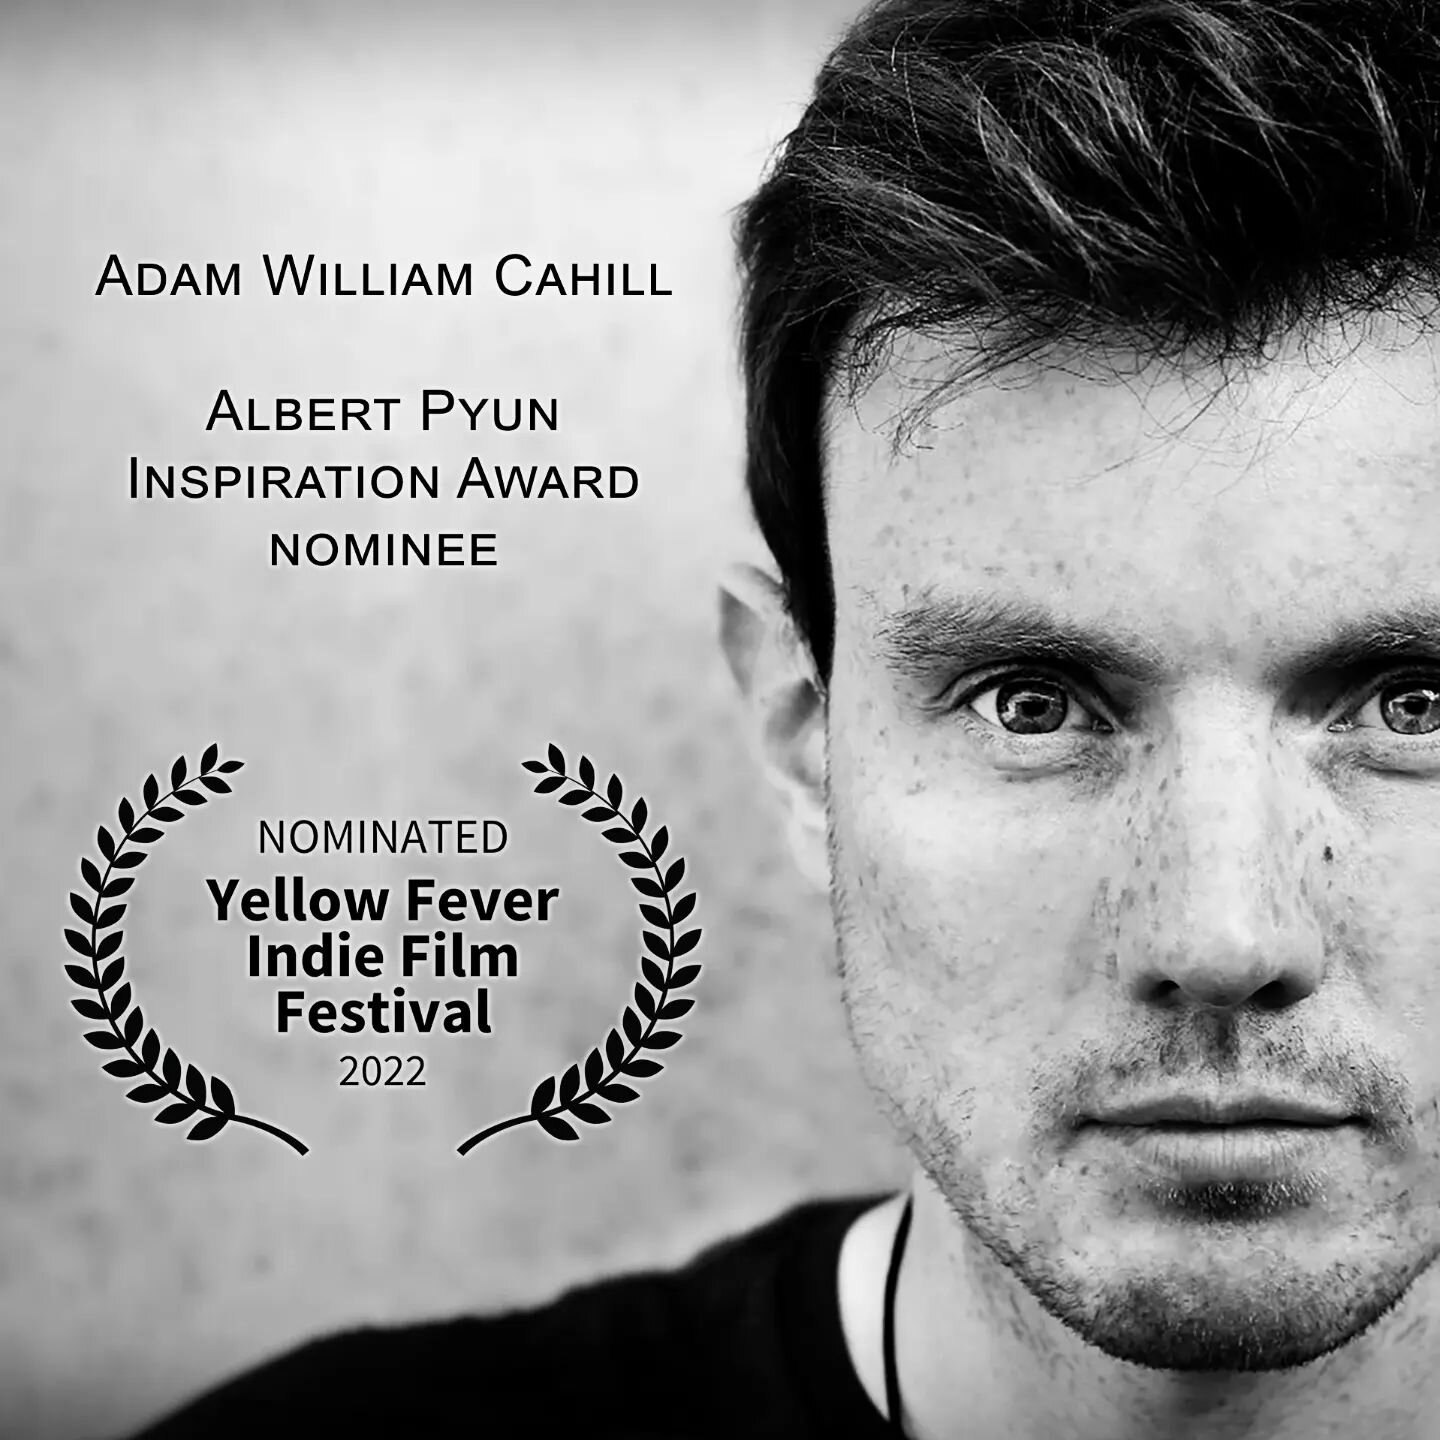 A FURTHER DIRECTOR MERIT 🌟 

Director @adamwilliamcahill was nominated last week for the Albert Pyun Inspiration Award by the Yellow Fever Independent Film Festival 🎉✨

Thank you so much to @theyfiff for the acknowledgement. We wish we could have g